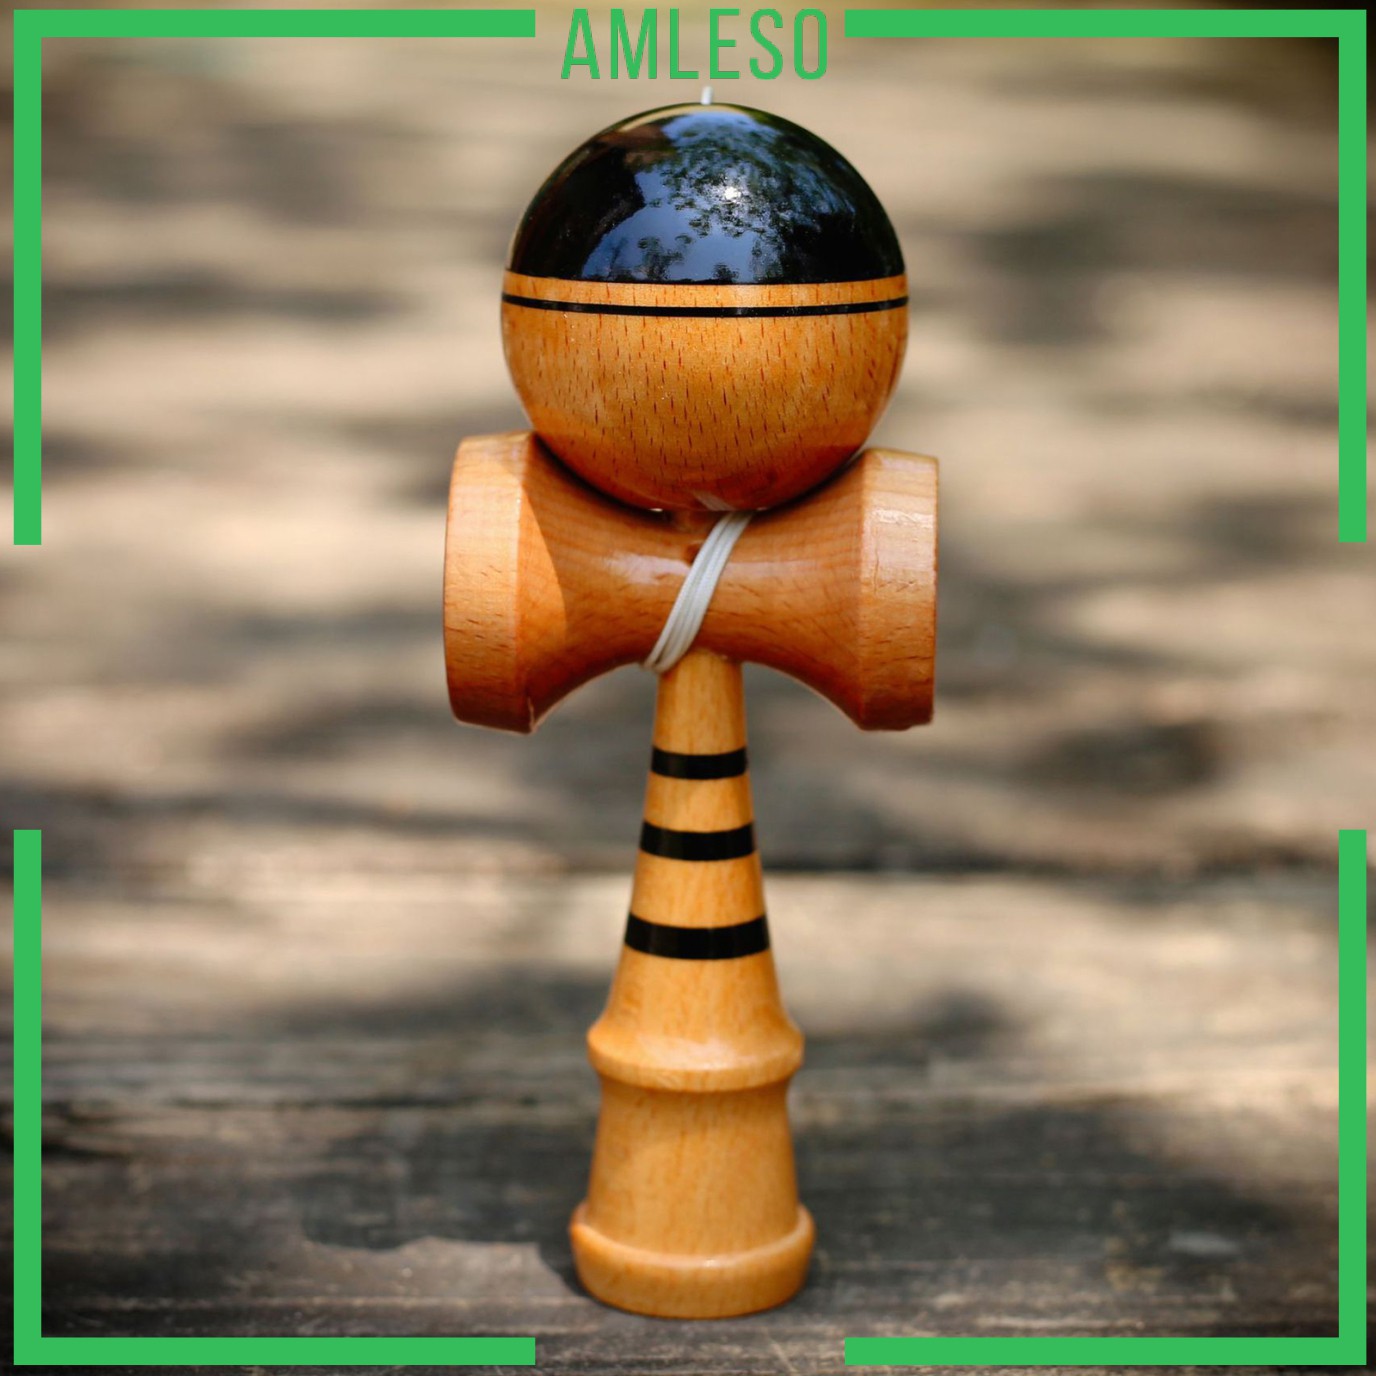 [AMLESO] Full Paint Wooden Kendama Ball Skillful Juggling Ball Toy Outdoor Leisure Sports